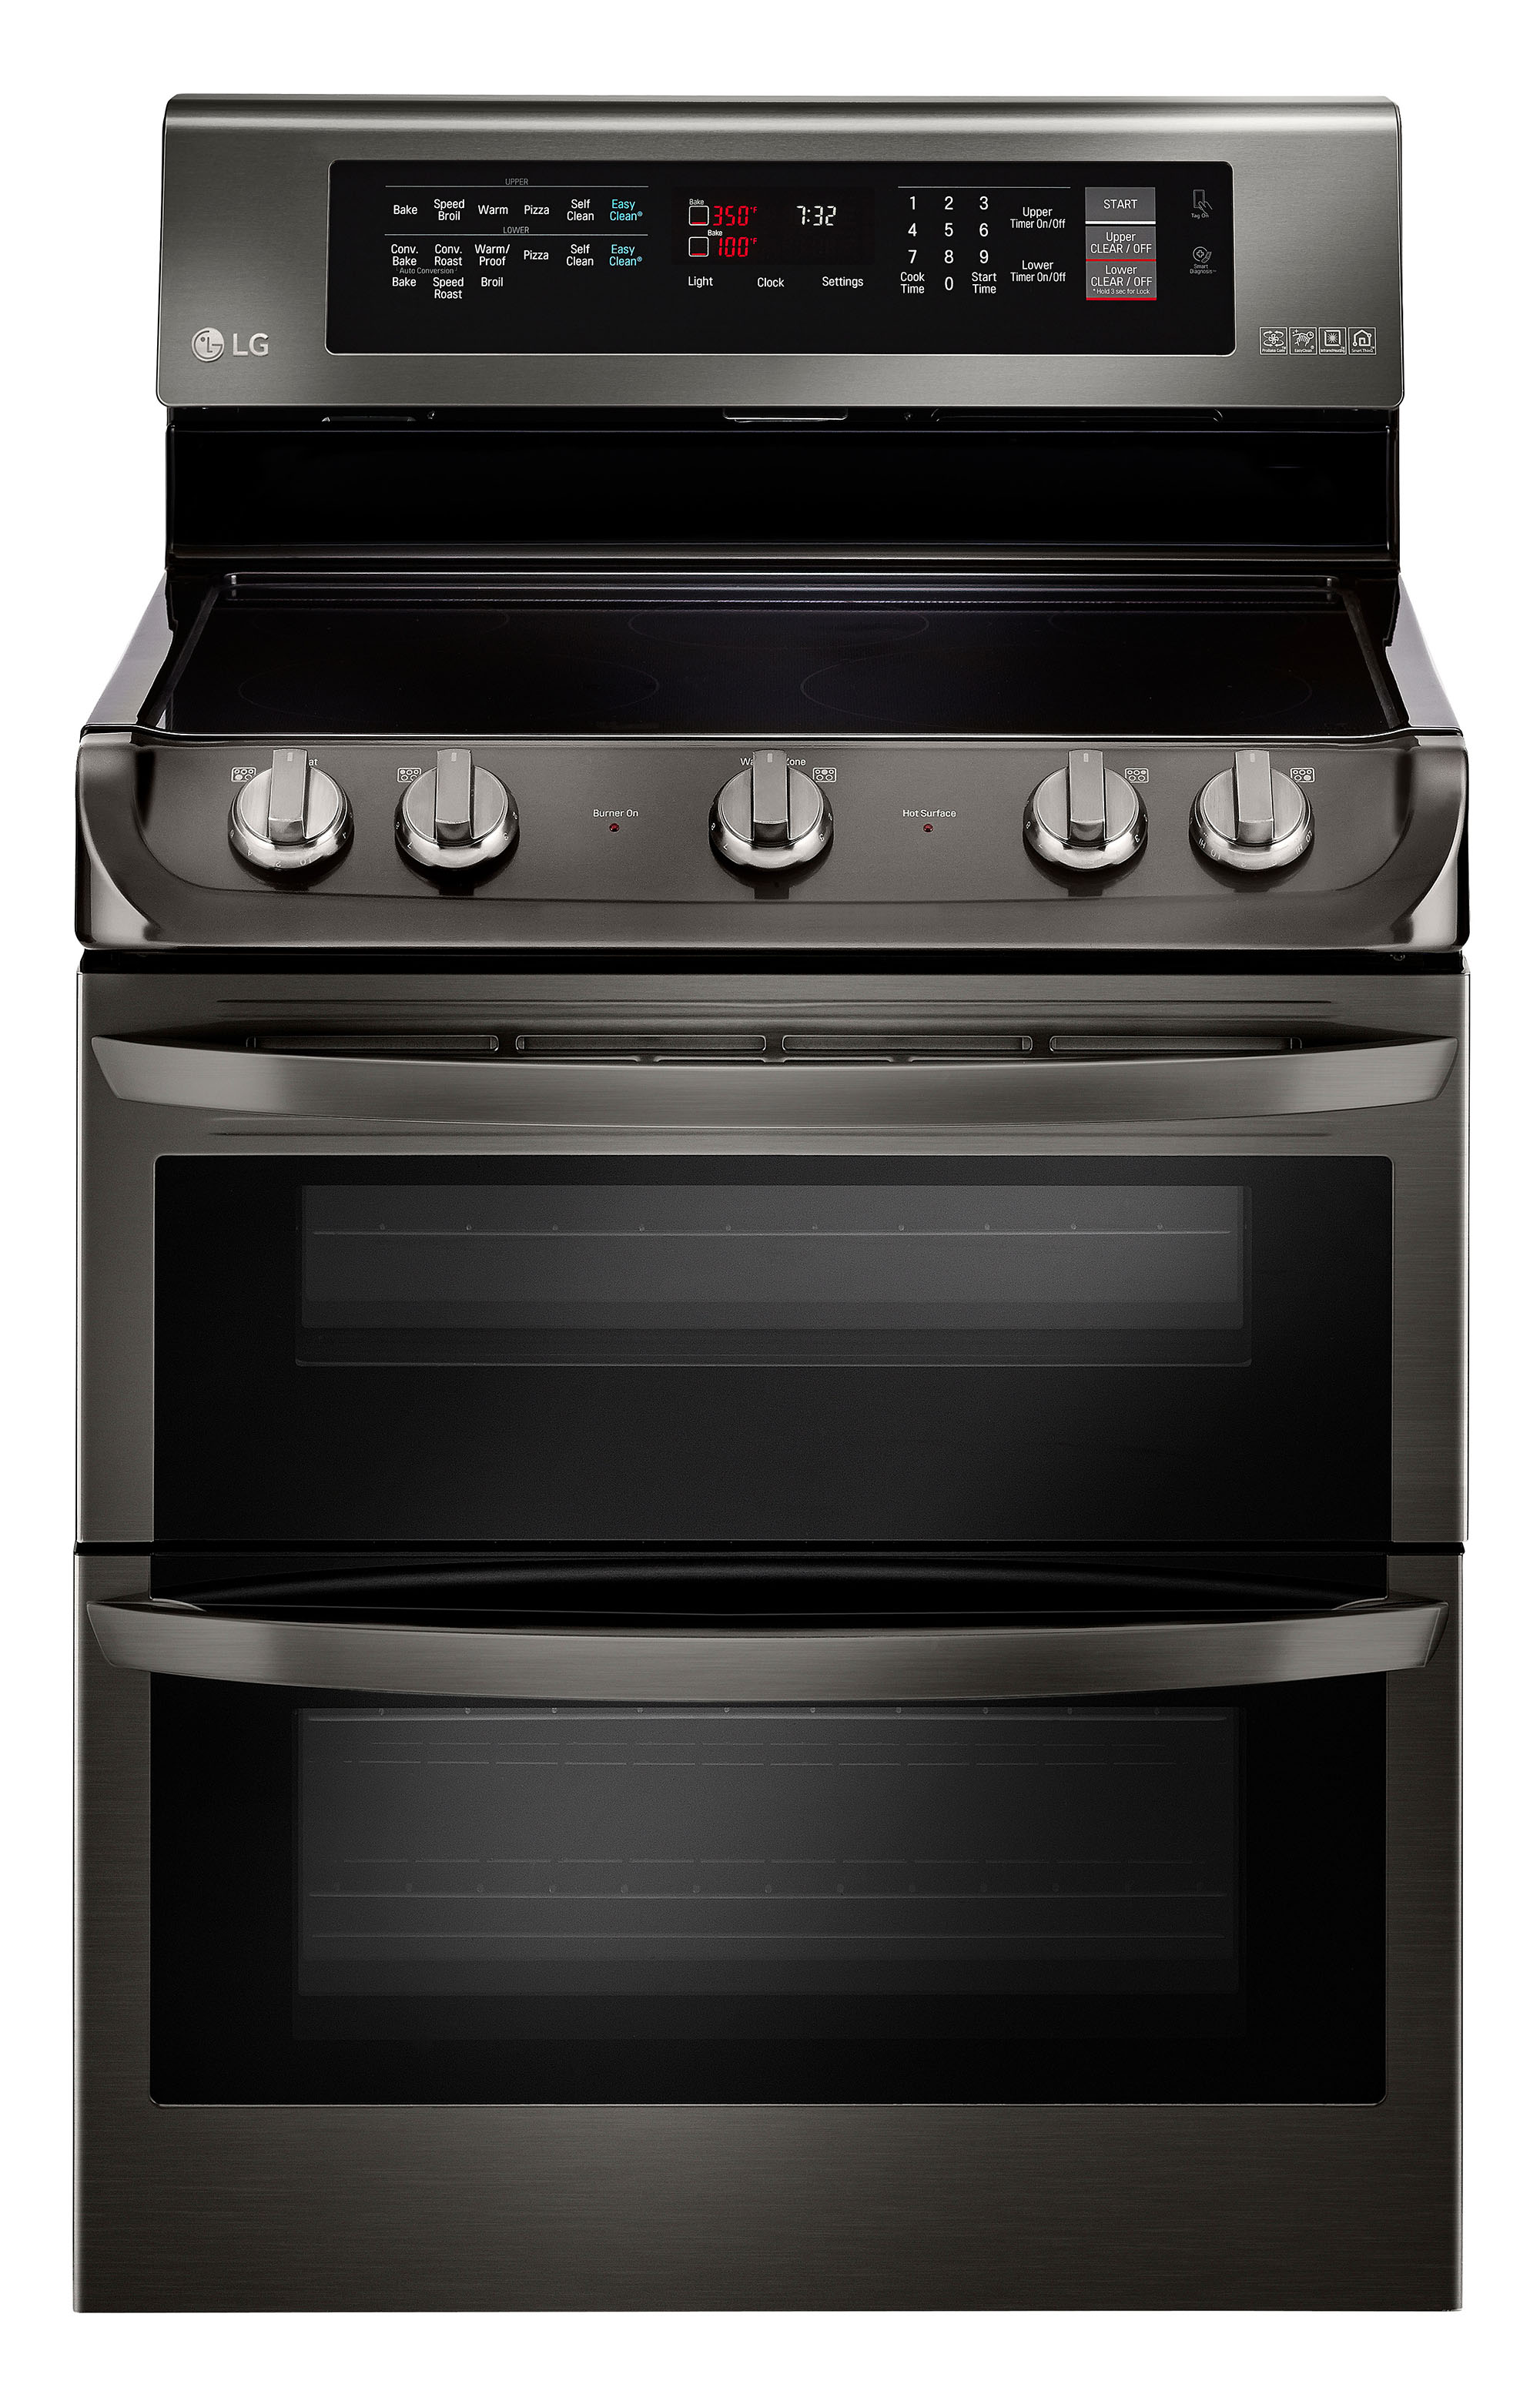 LG LDE4415BD 7.3 cu. ft. Double Oven Electric Range w/ProBake Electric Black Stainless Steel Stove